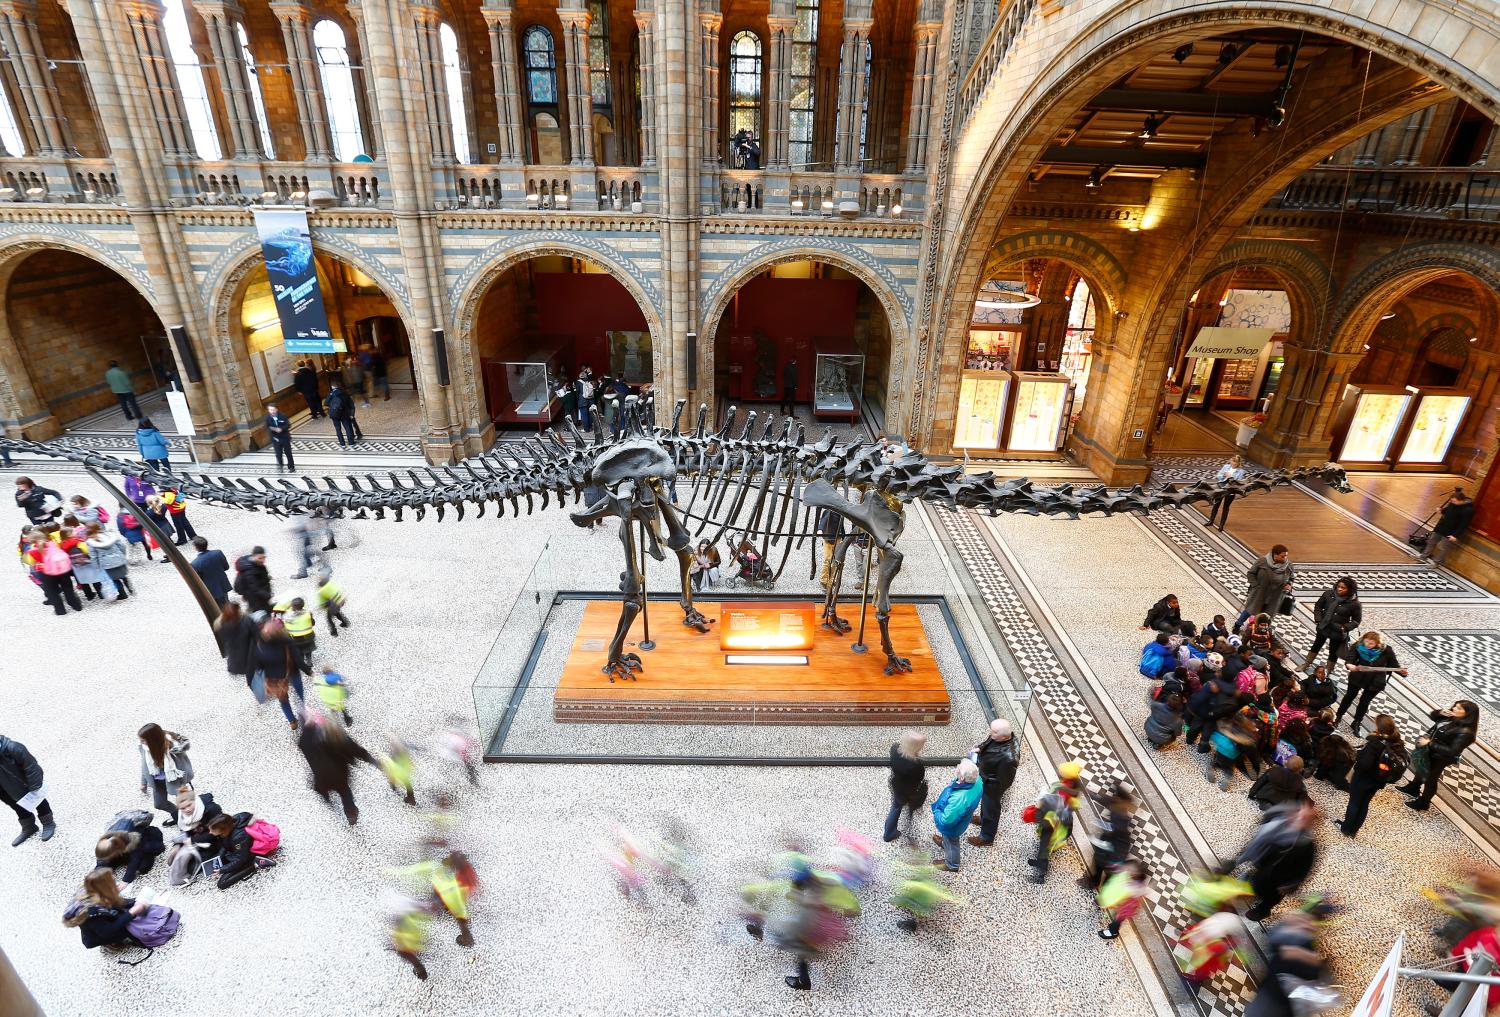 Visiting school children stream past, as others sit under "Dippy", the moulded resin replica of a fossilised Diplodocus in the main hall of the Natural History Museum in London January 29, 2015. One of Britain's most-loved museum exhibits, the skeleton-cast of Dippy the Diplodocus dinosaur at the Natural History Museum in London, is to be replaced, much to the distress of its many fans. The museum announced on Thursday that Dippy, who has graced its cathedral-like central hall for 35 years, will make way for the bones of a blue whale that has been hanging in a different hall since 1938.  REUTERS/Andrew Winning (BRITAIN - Tags: SOCIETY ENVIRONMENT TRAVEL) - GM1EB1T1L4001